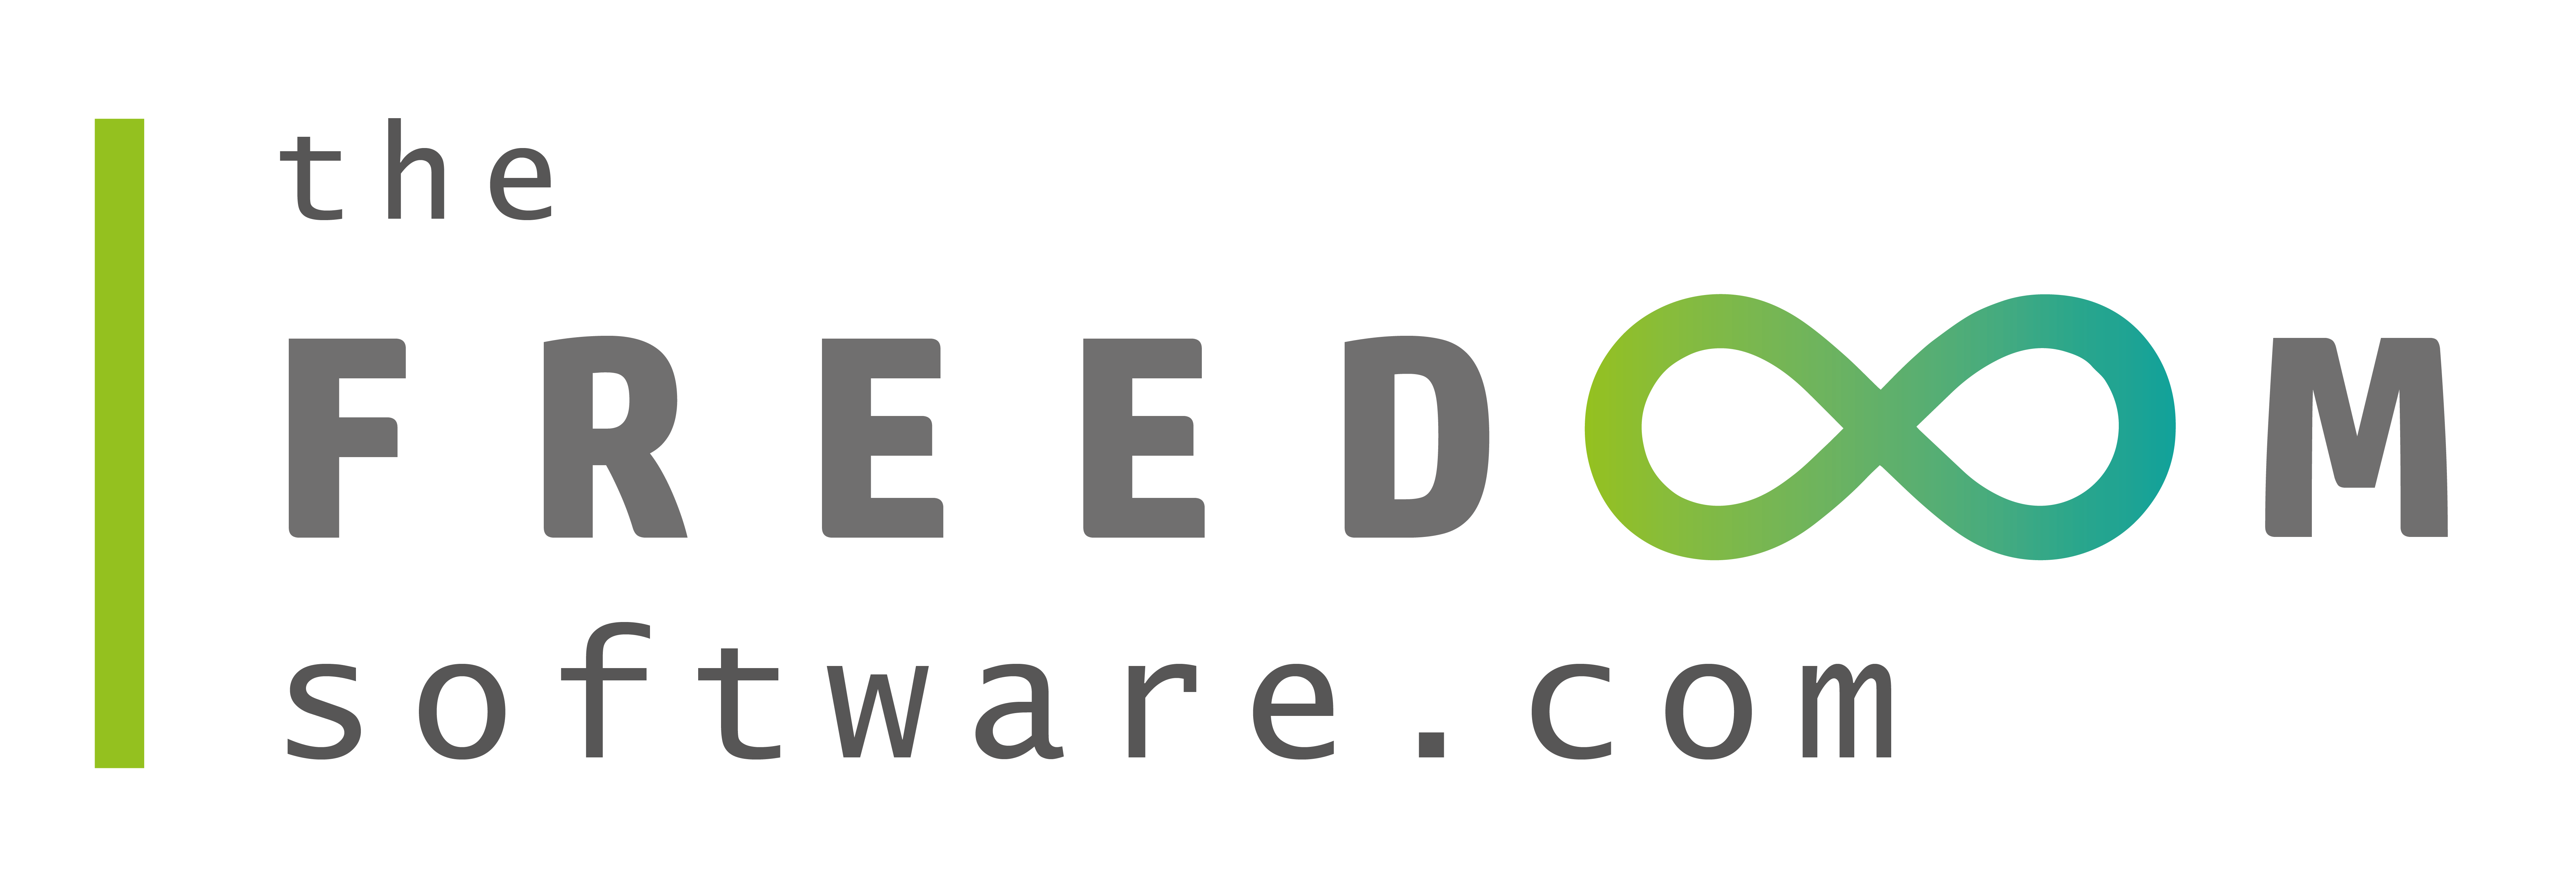 freedom software download